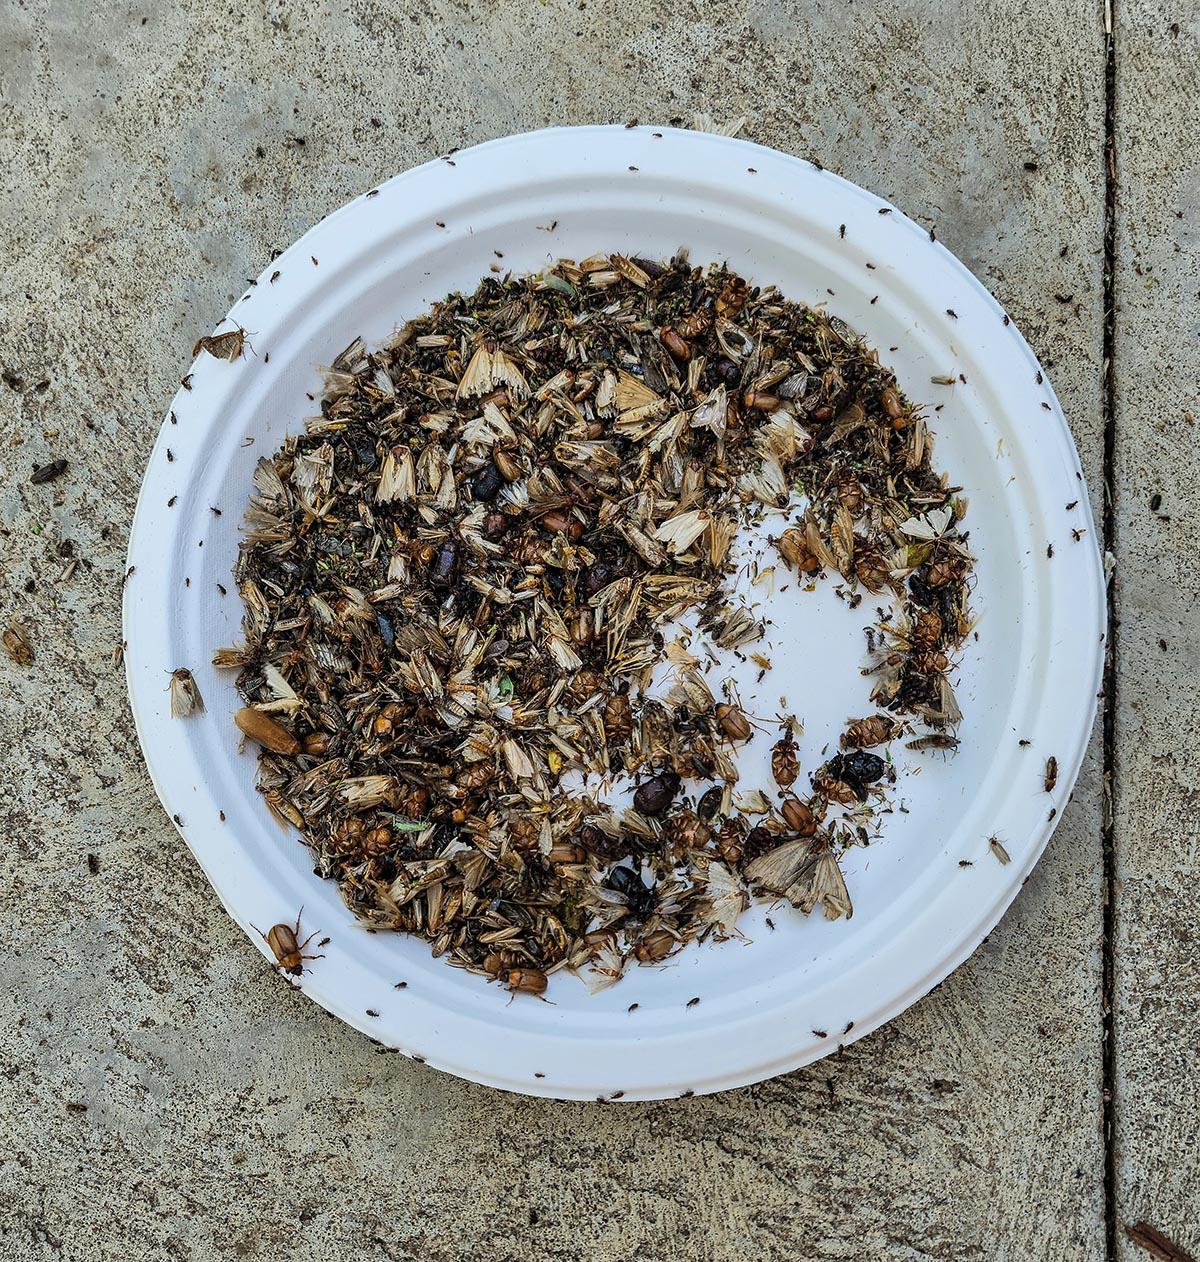 A collection of insects killed by the DynaTrap insect trap